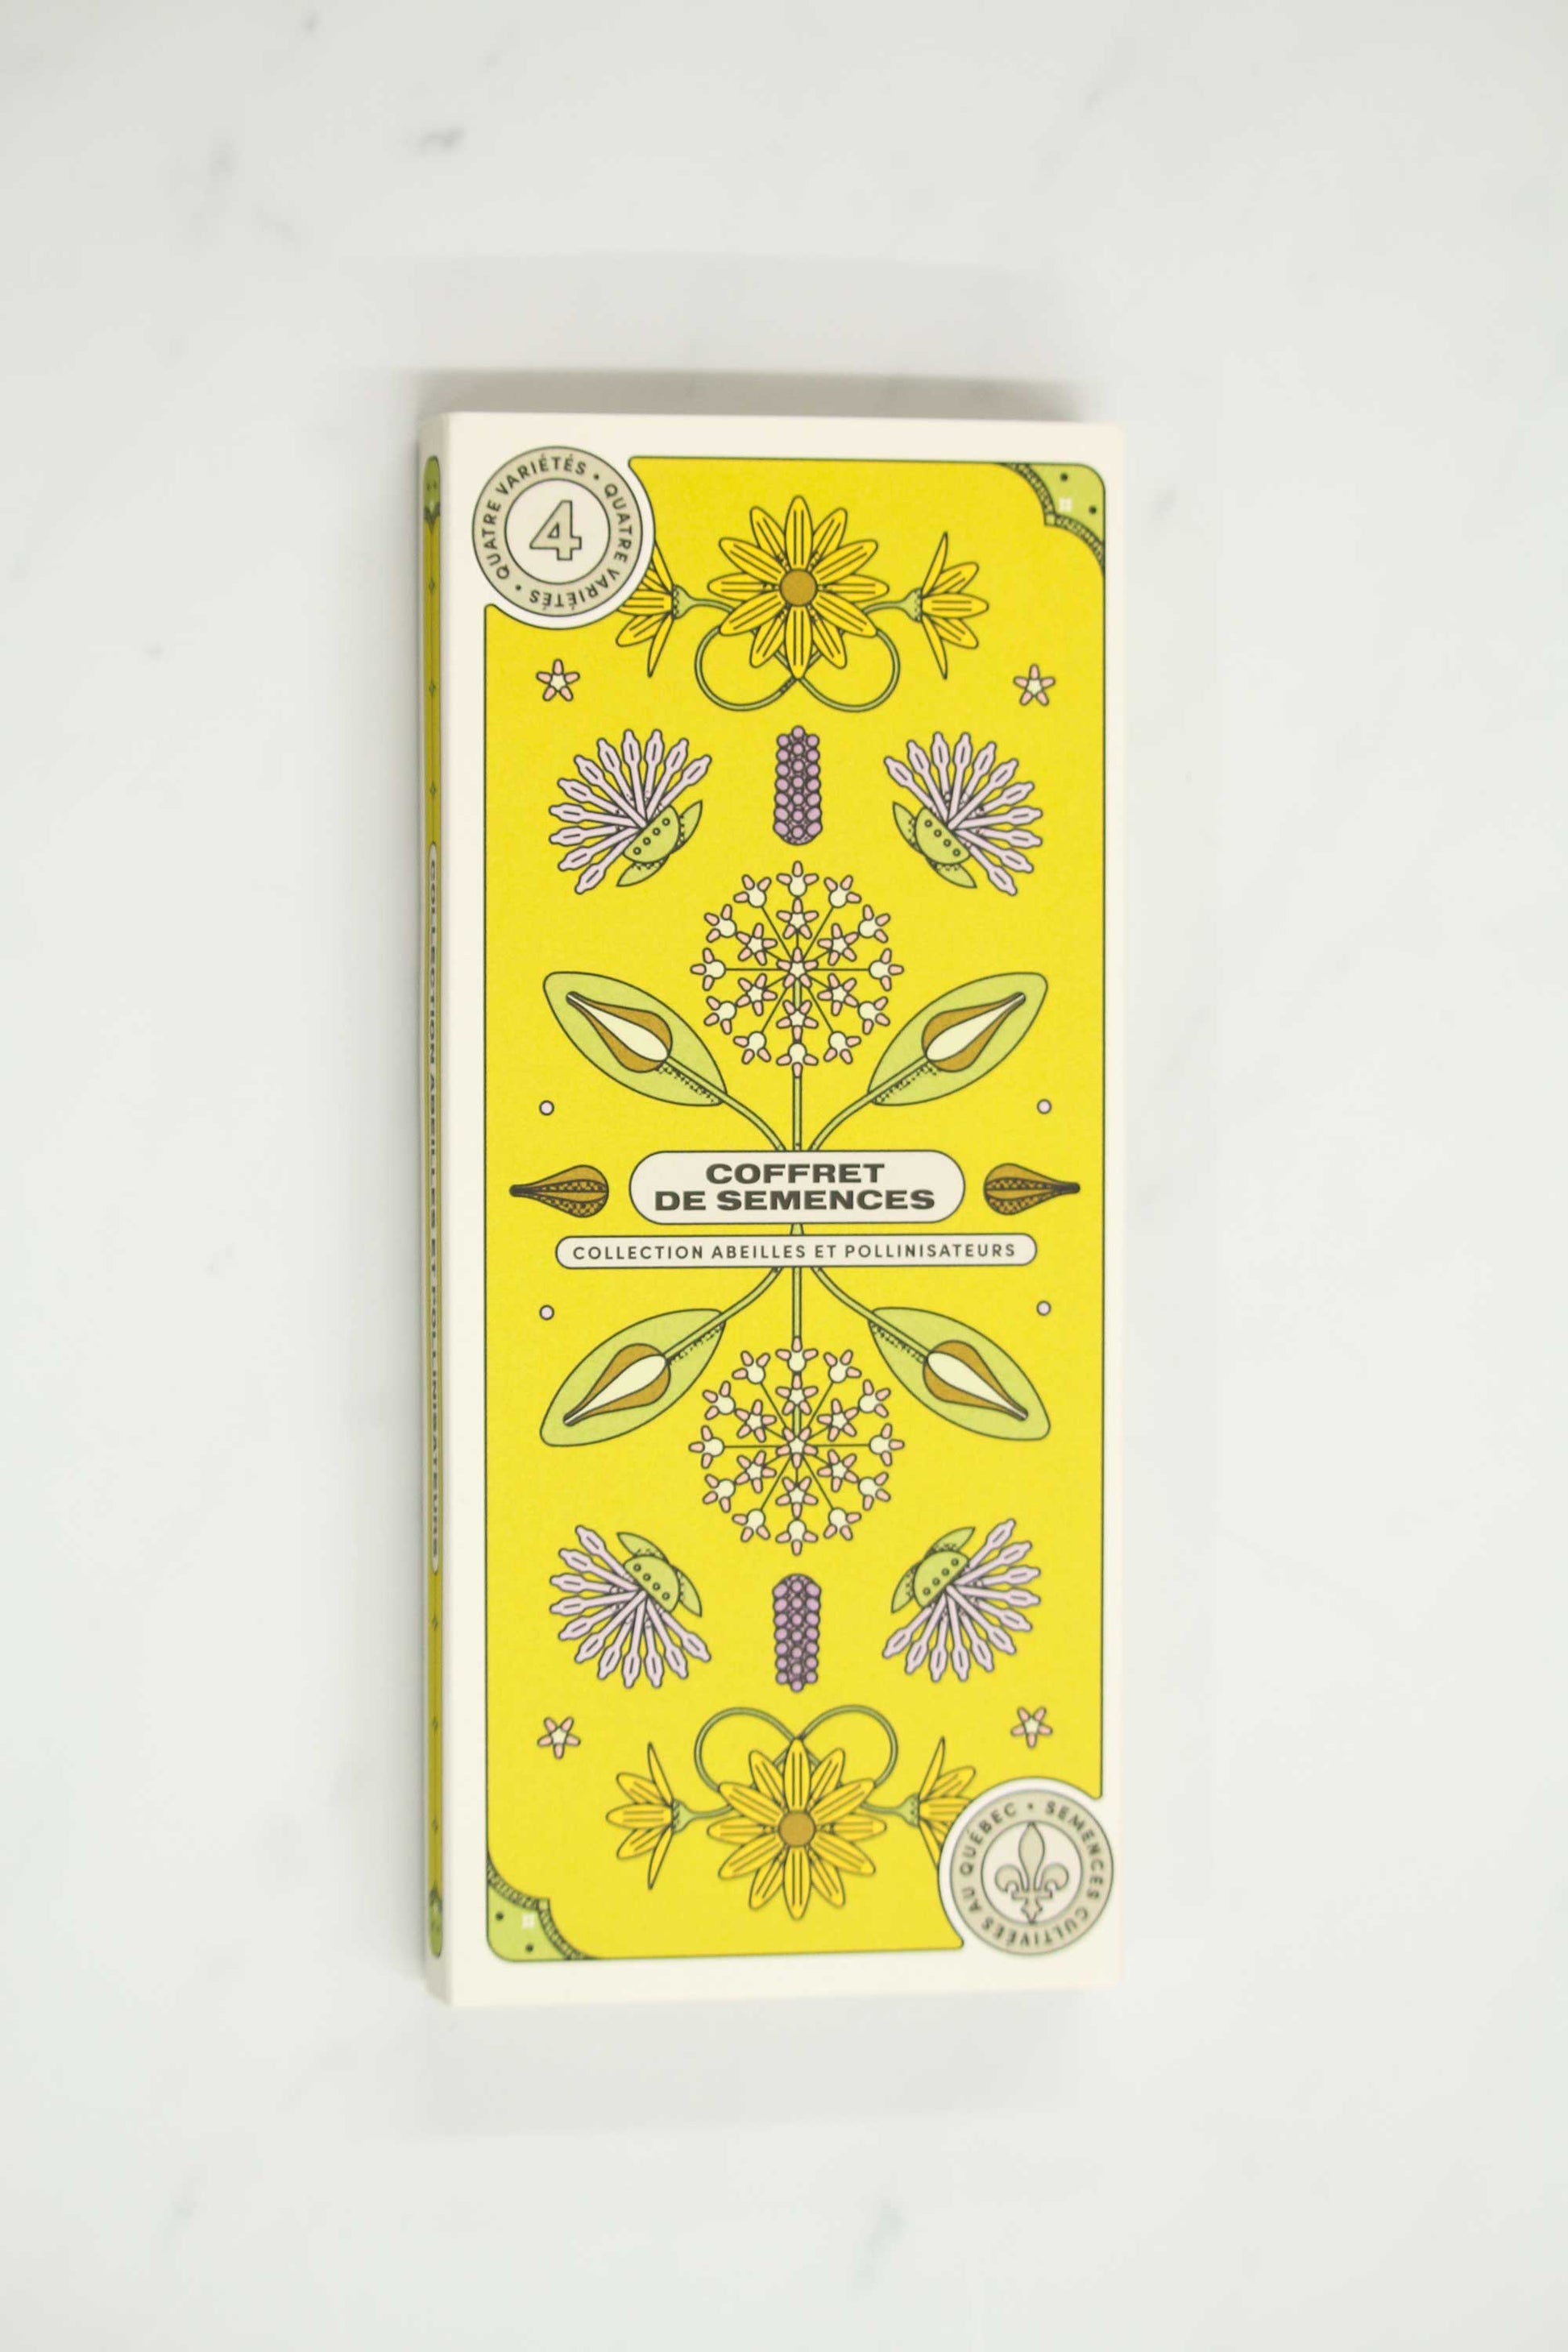 Bees & Pollinators seed collection box set with illustrations of various flowers